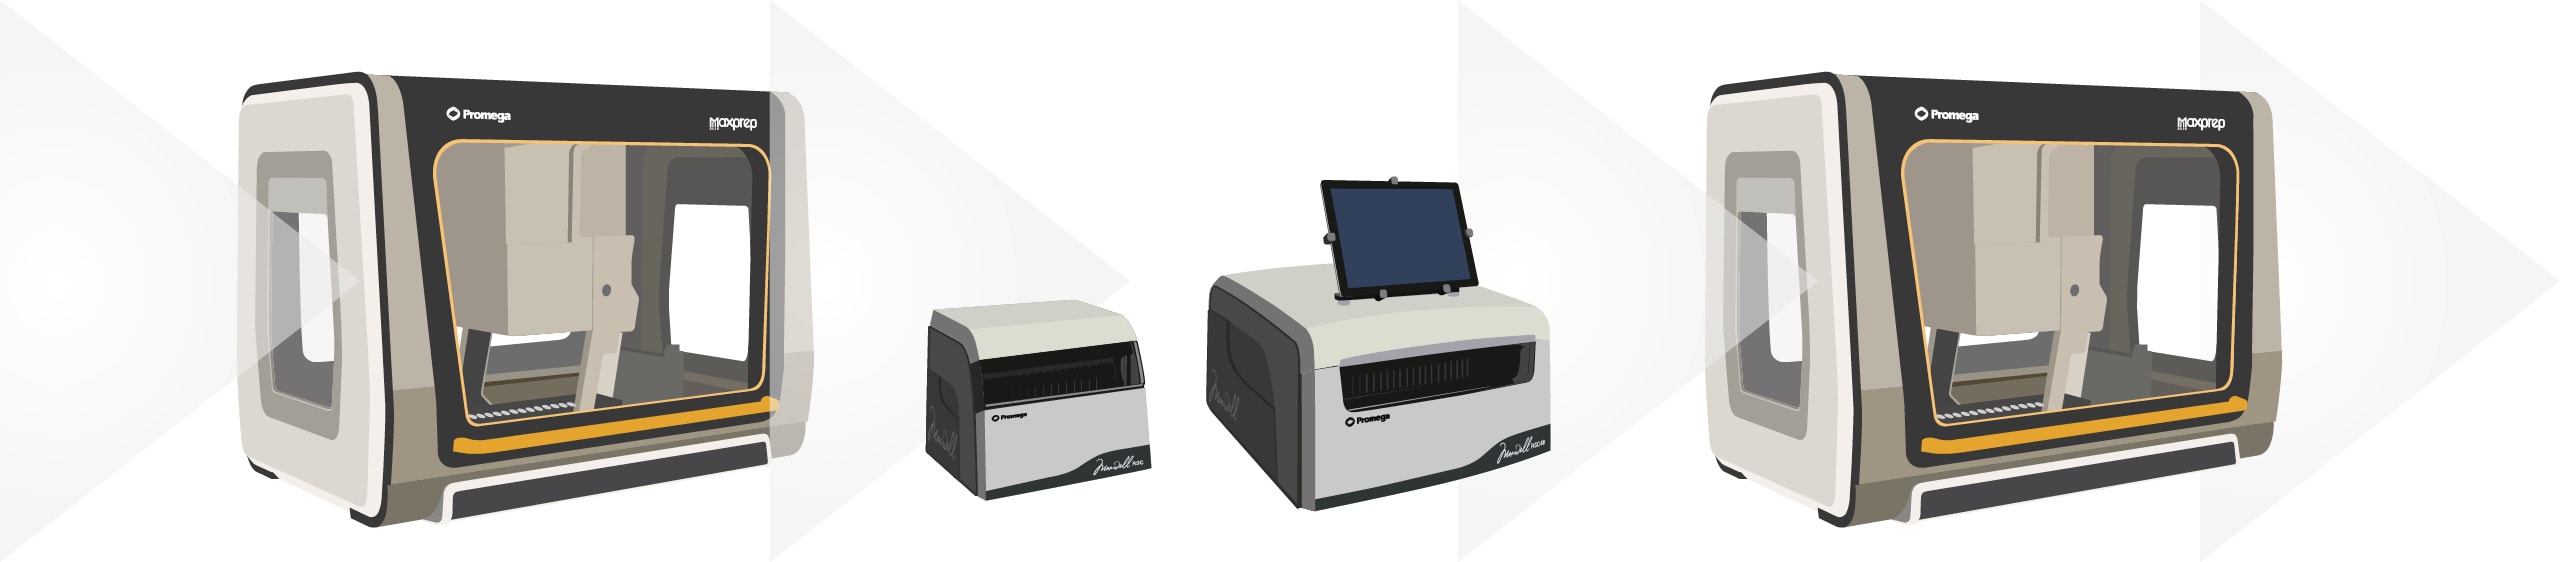 Maxprep and maxwell instruments provide a complete workflow solution for pre-processing,  automated DNA extraction and post-processing